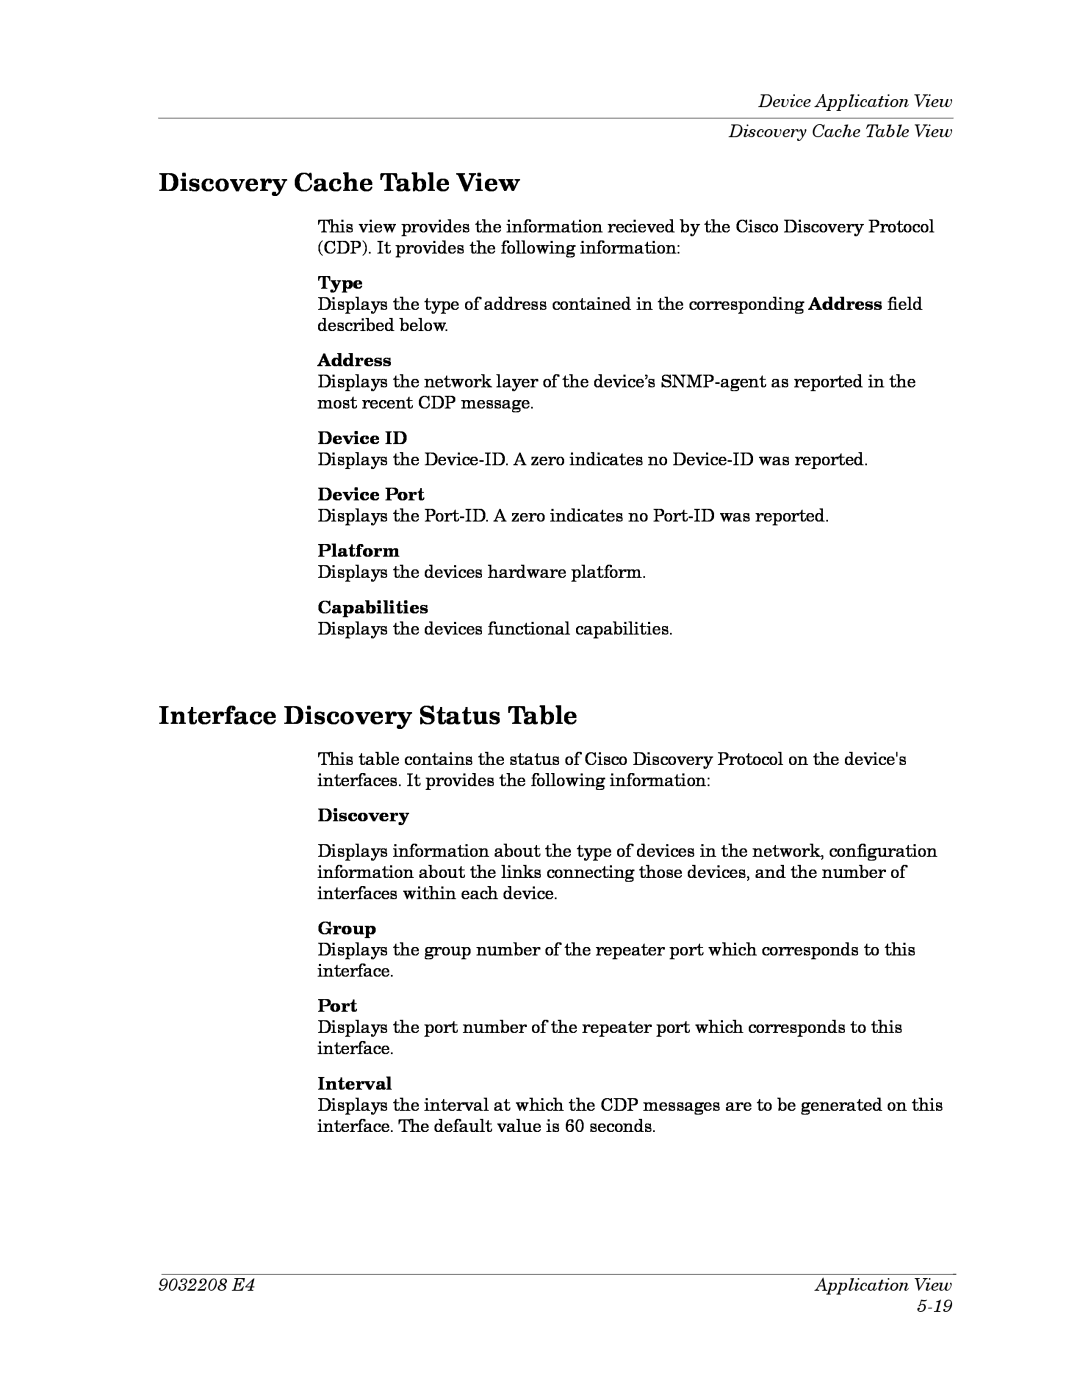 Cabletron Systems 5000, 5500 Discovery Cache Table View, Interface Discovery Status Table, Device ID, Device Port, Group 